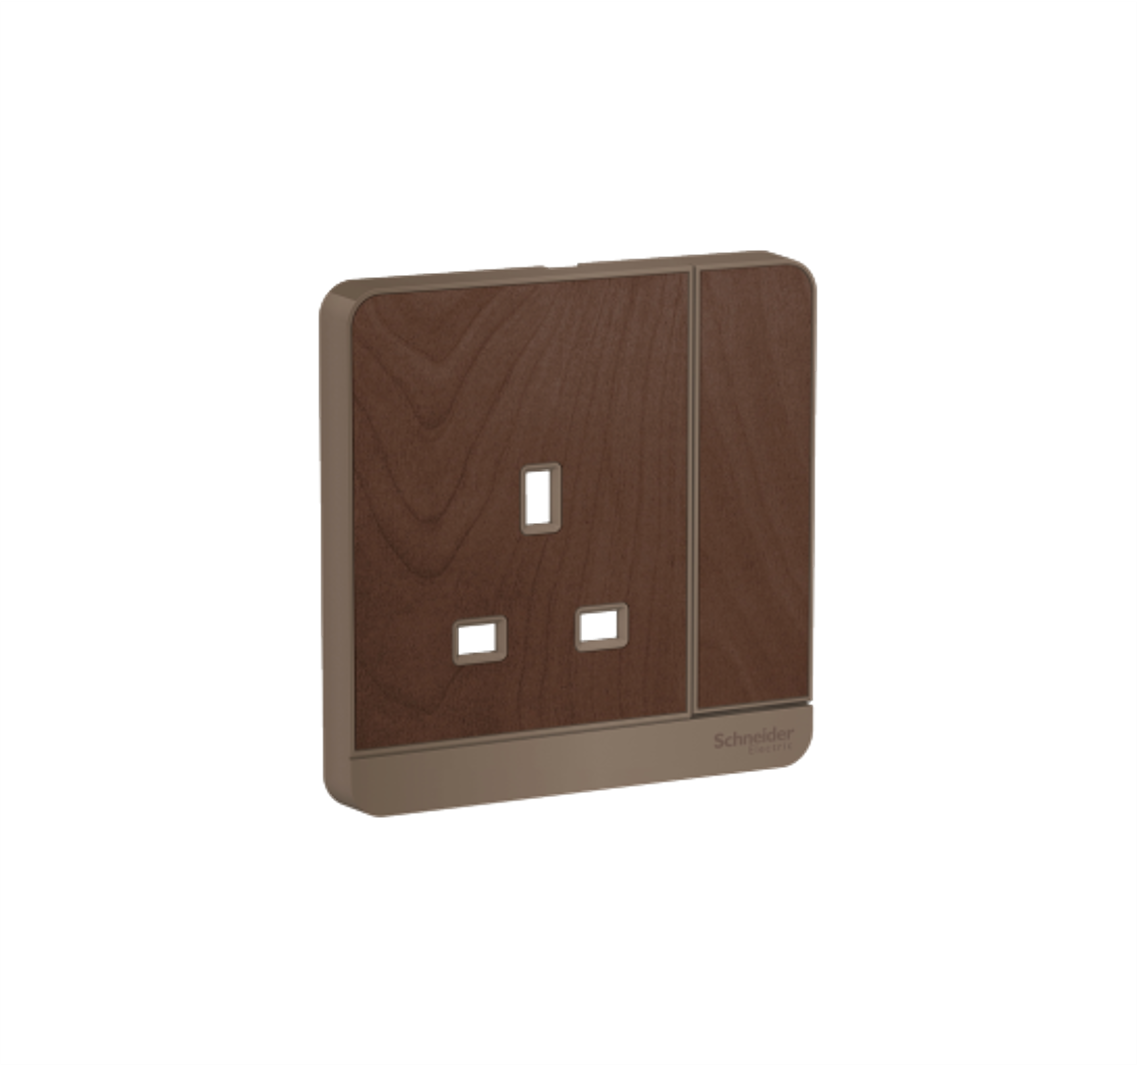 AvatarOn - 13A 1 Gang Switched Socket Cover (Dark Wood)